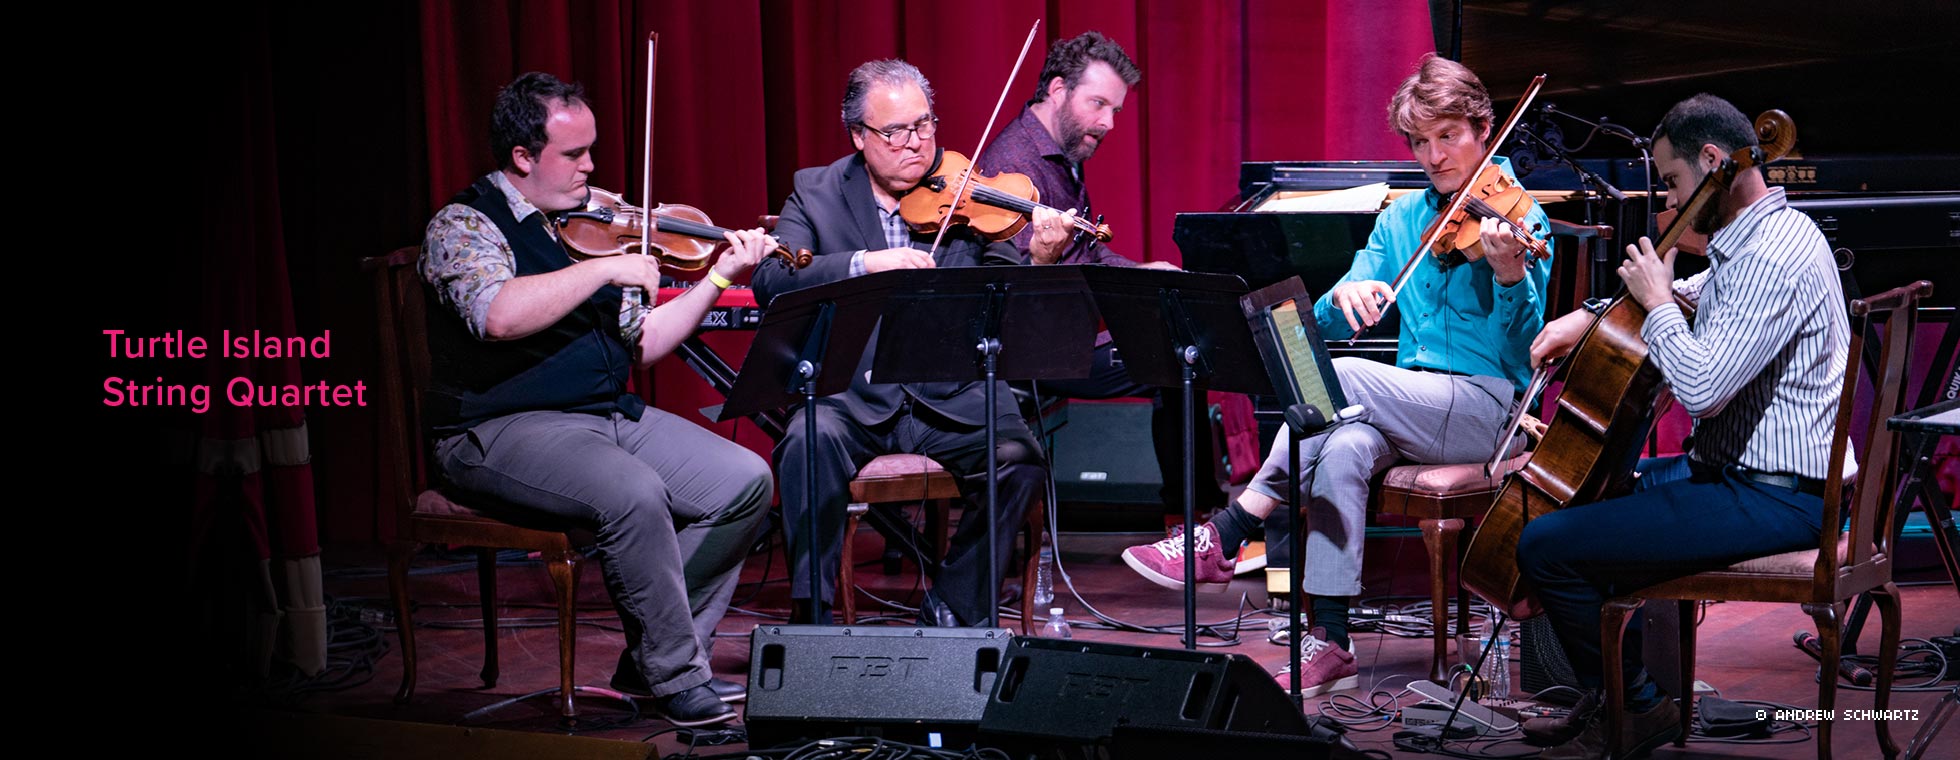 The Turtle Island String Quartet is shown sitting around a music stand and playing their instruments.